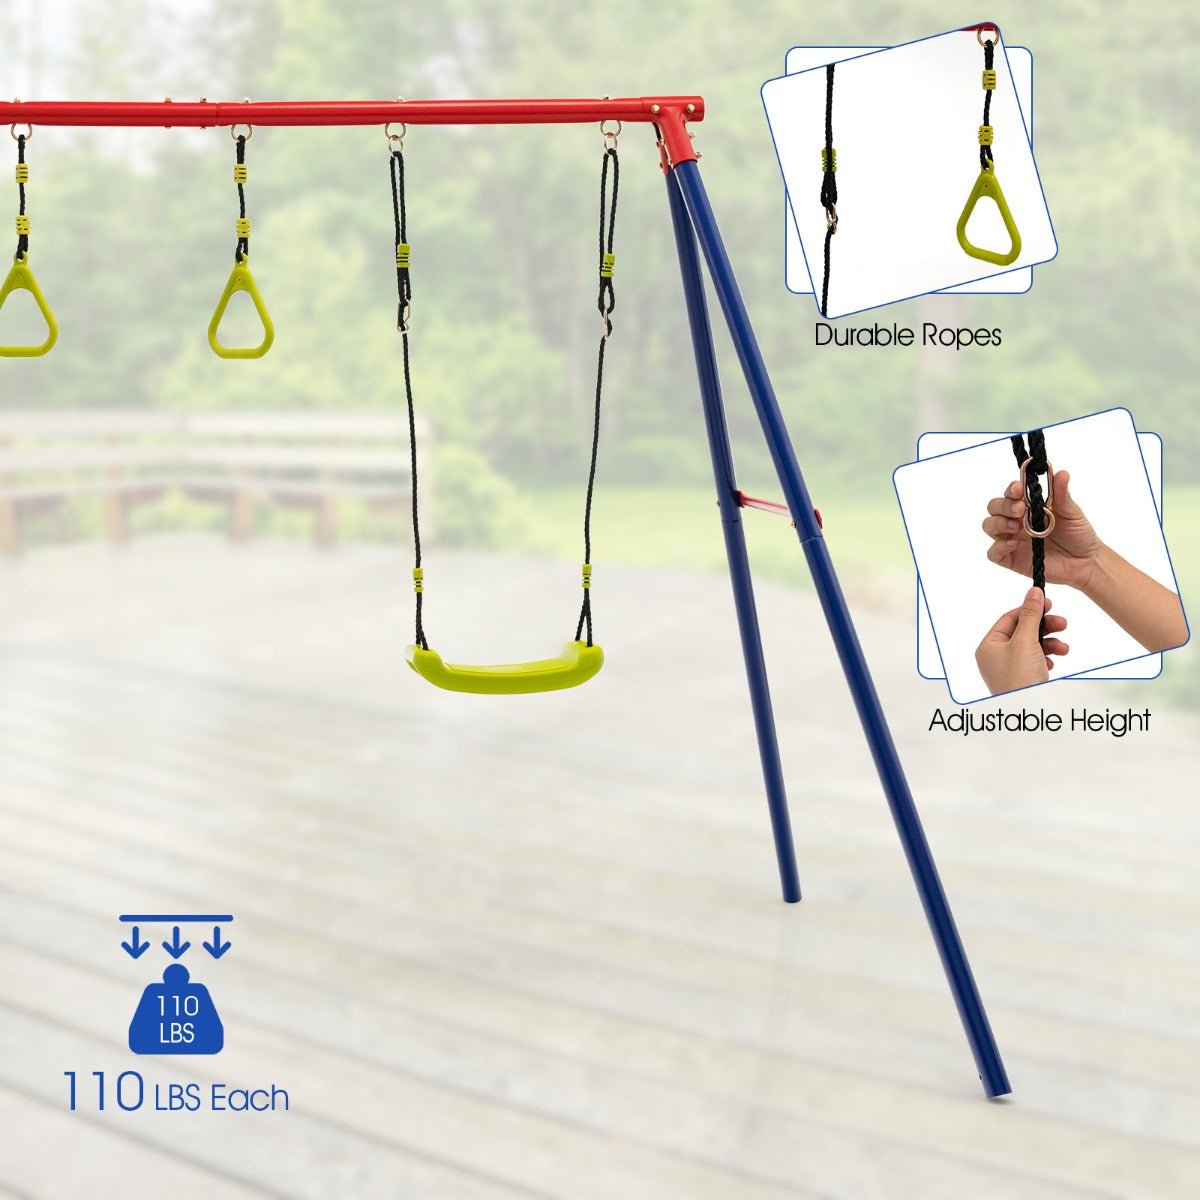 All-in-One 3-in-1 Swing Set: Safe Outdoor Entertainment for Children